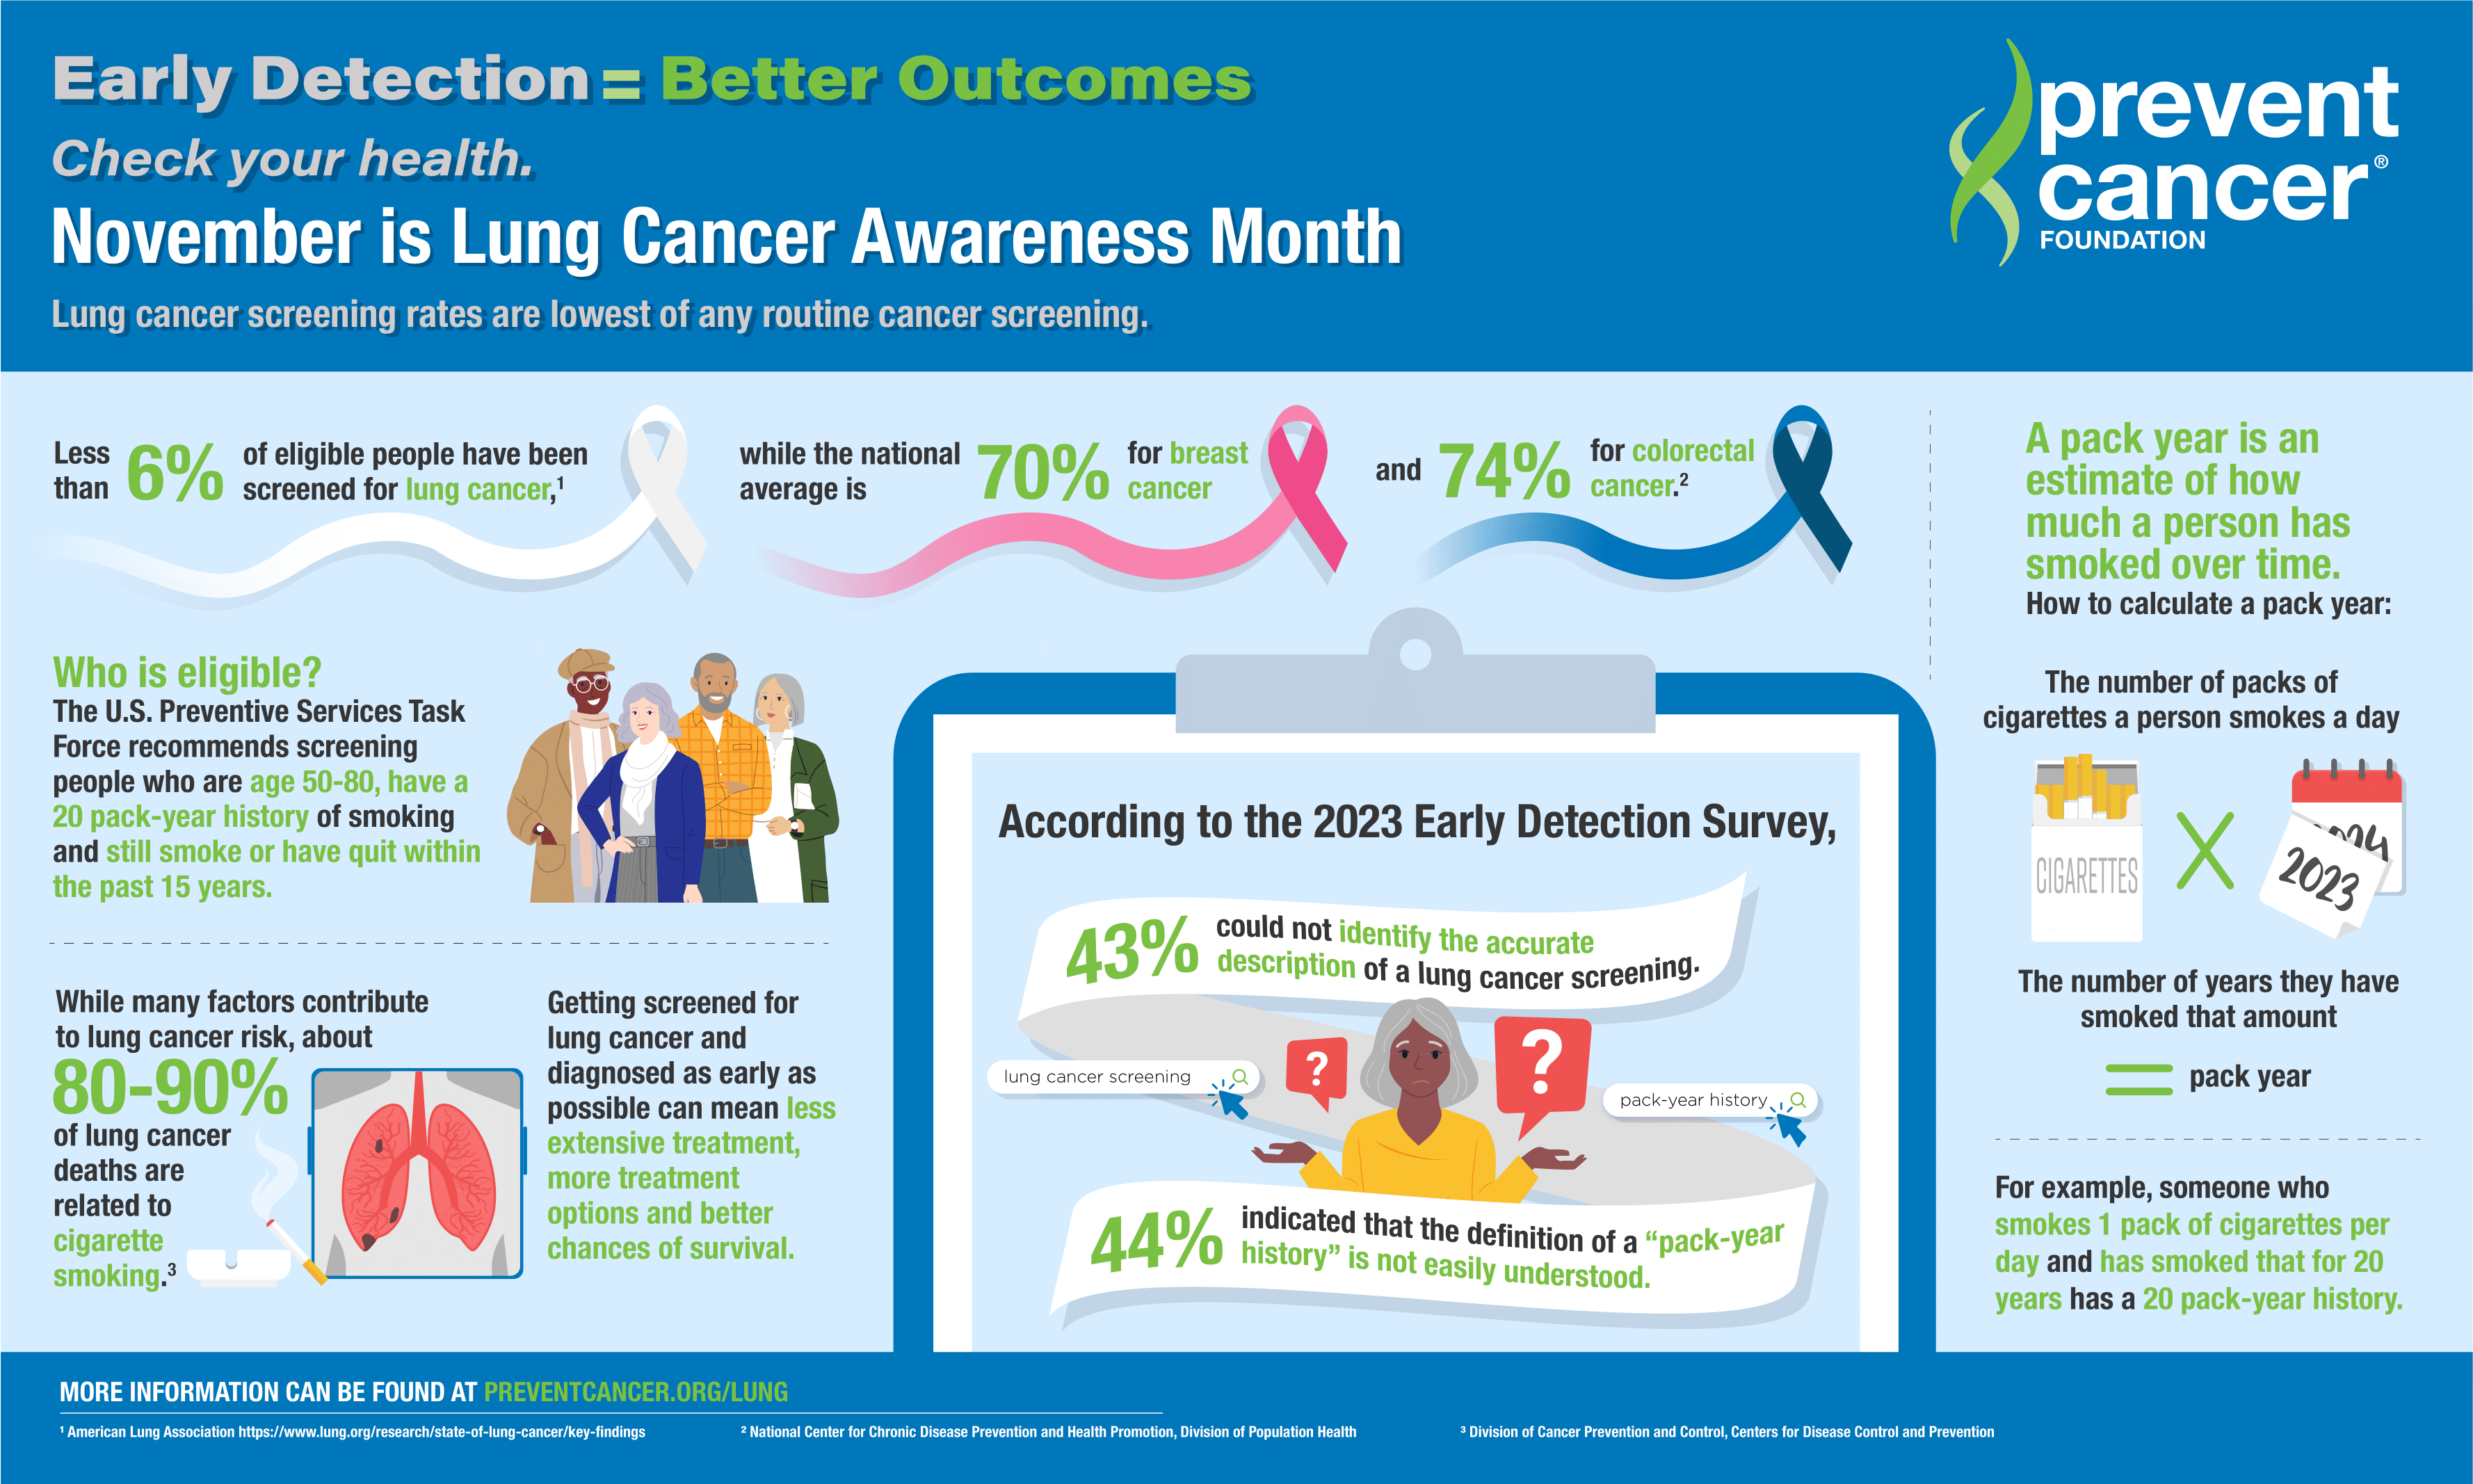 https://www.preventcancer.org/wp-content/uploads/2023/10/14222-PCF-Lung-Cancer-Infographic_Horizontal_FINAL.png